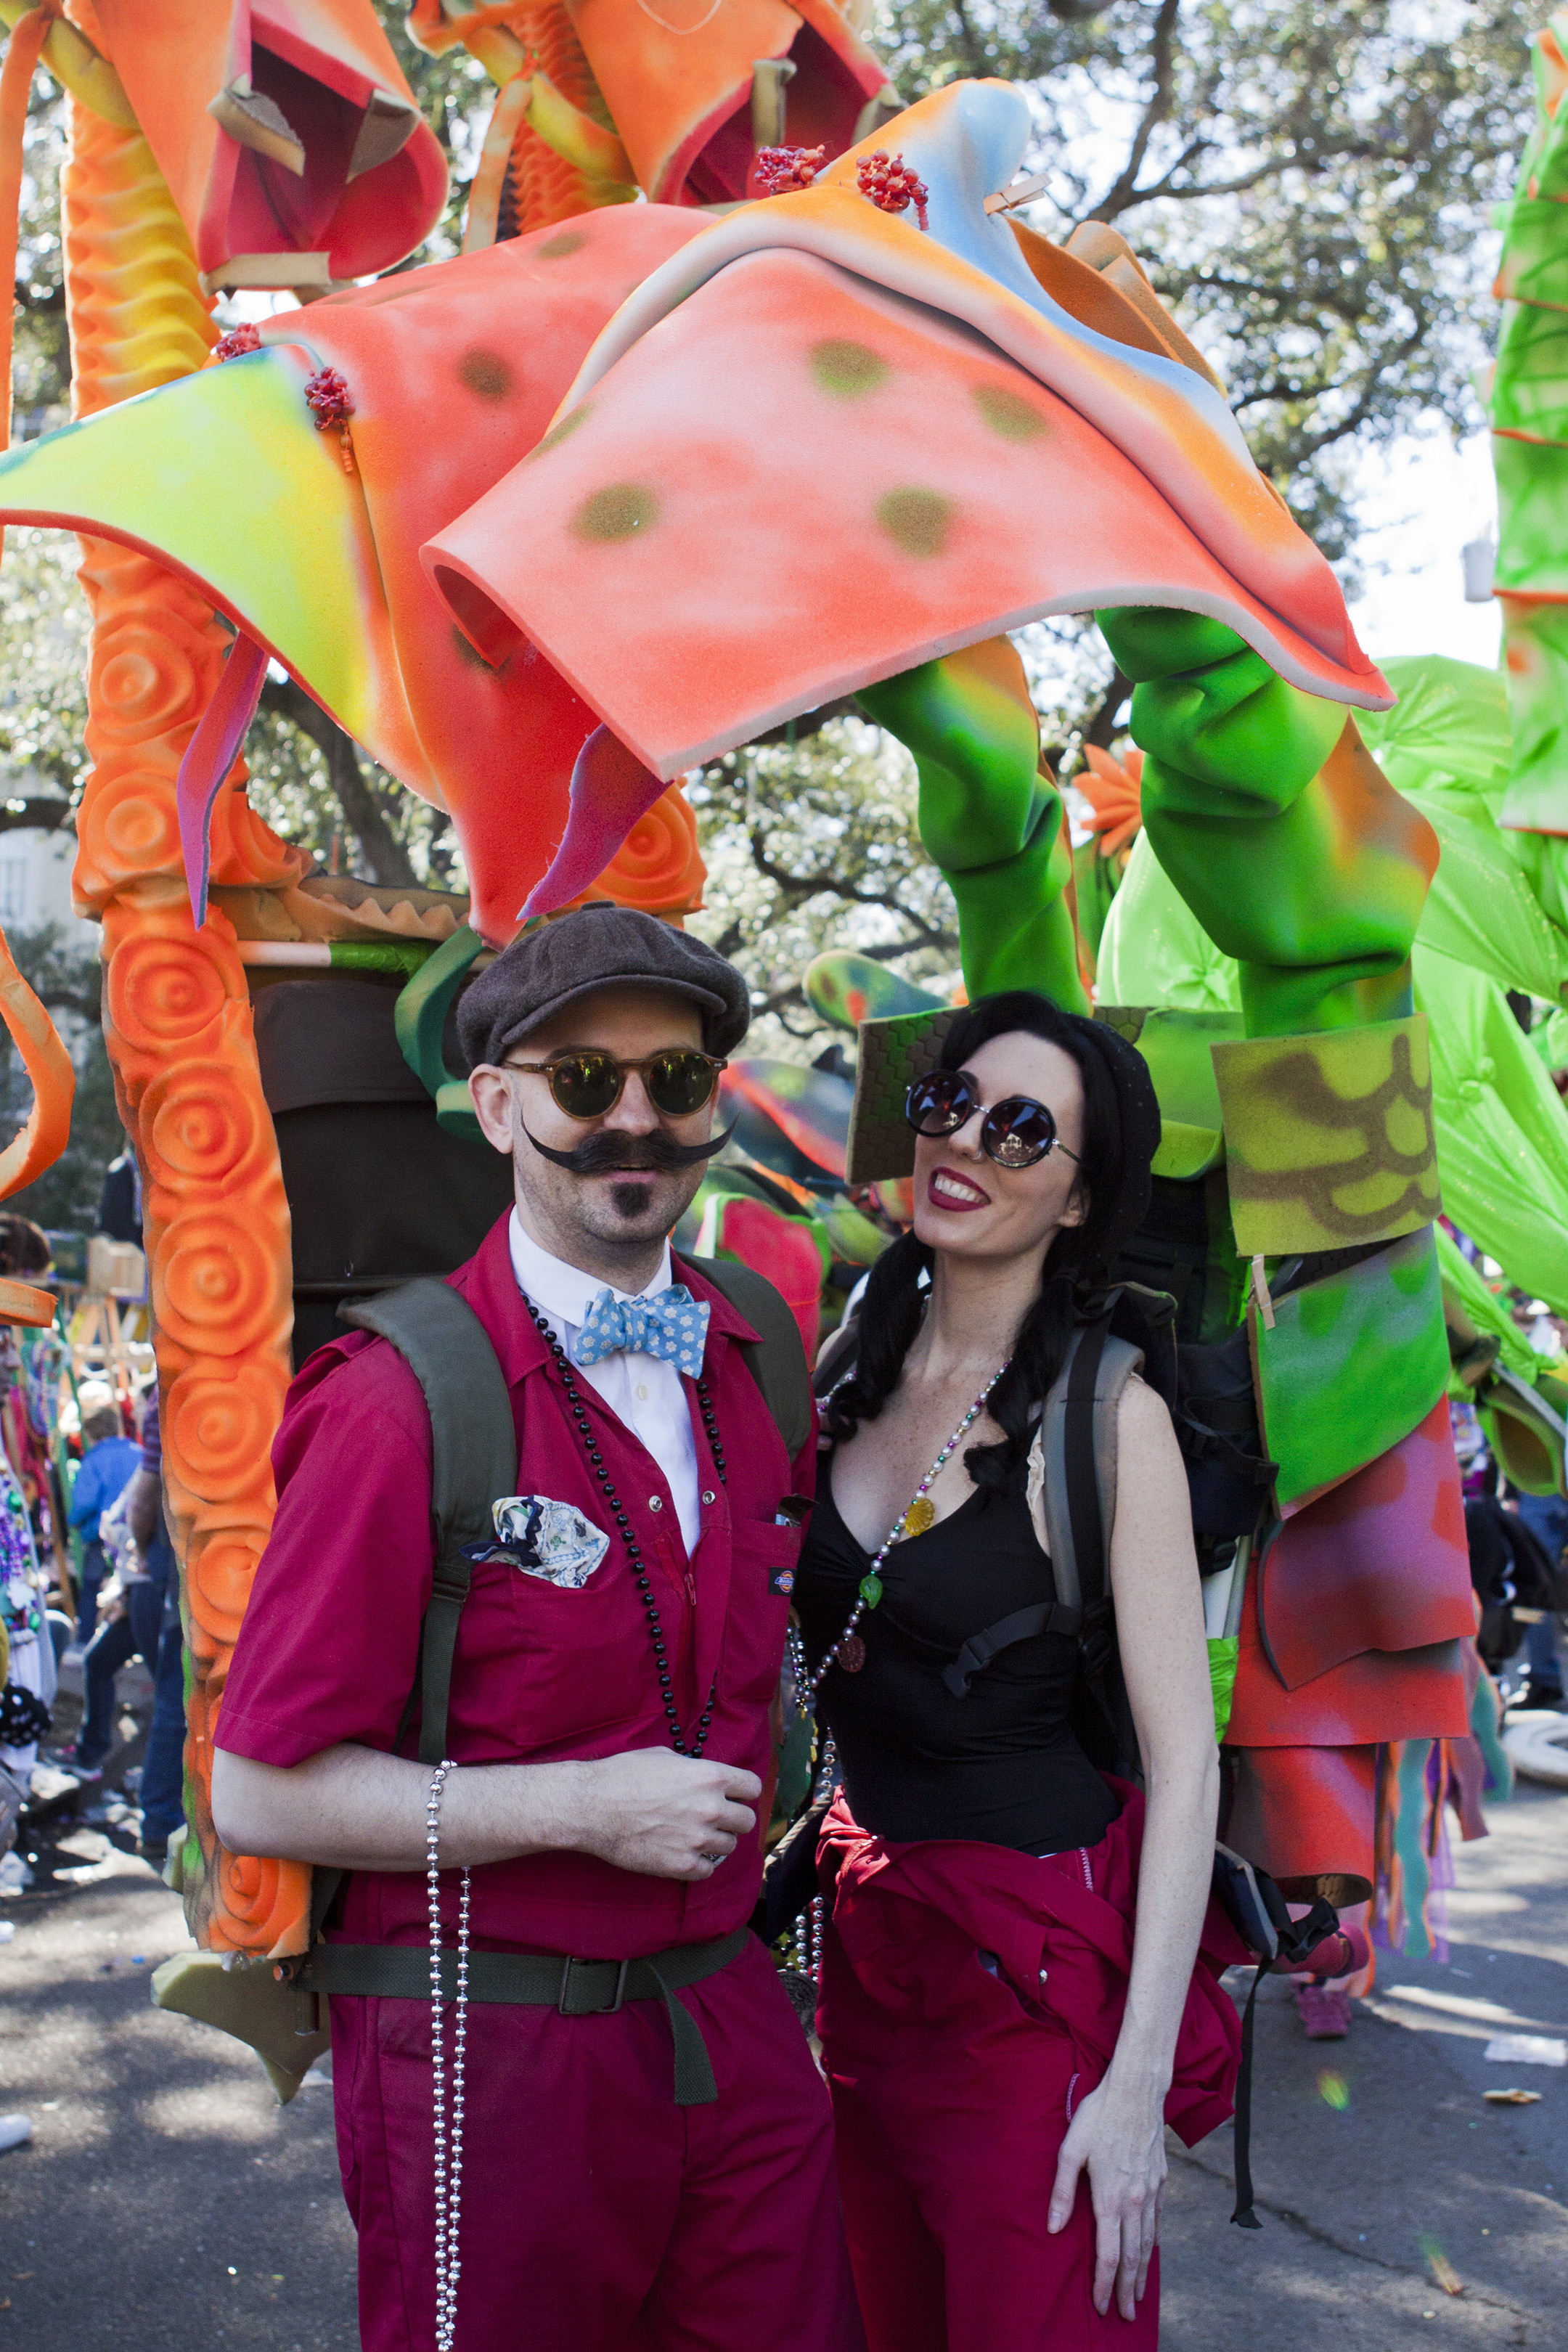 Two members of the “Dragons of New Orleans” walking krewe displayed their homemade costumes during their participation in the Tucks Parade. 